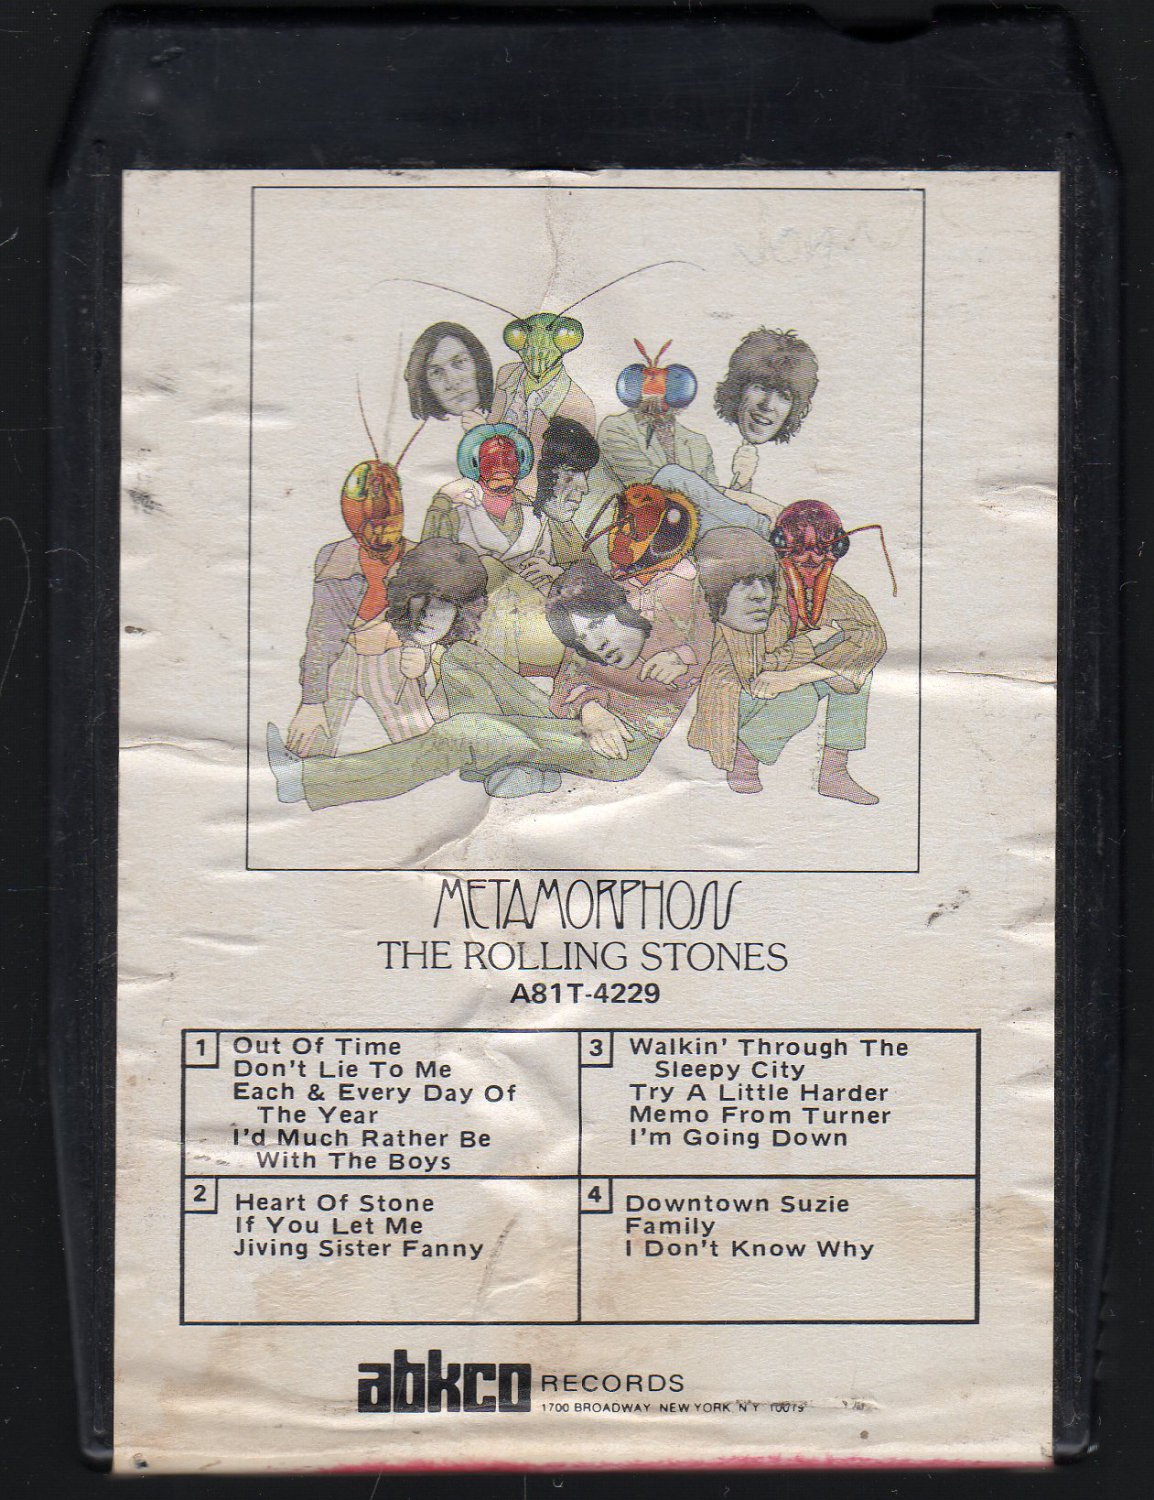 The Rolling Stones - Metamorphosis 1975 ABKCO A31 8-track tape